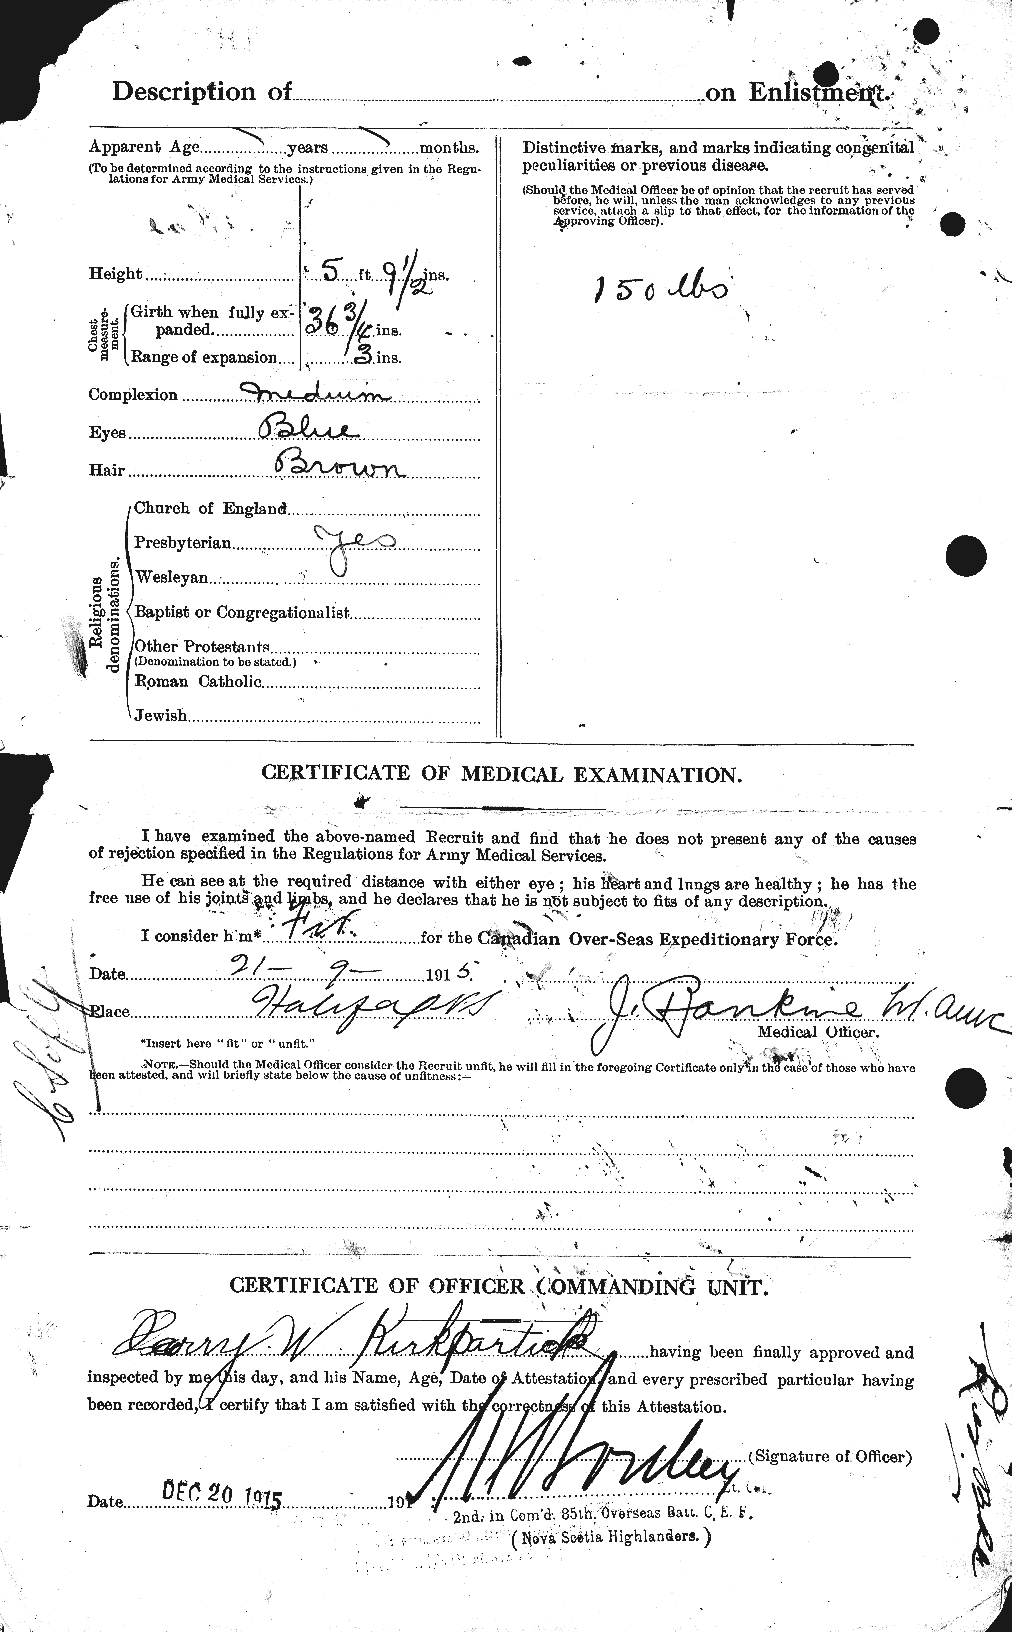 Personnel Records of the First World War - CEF 436064b